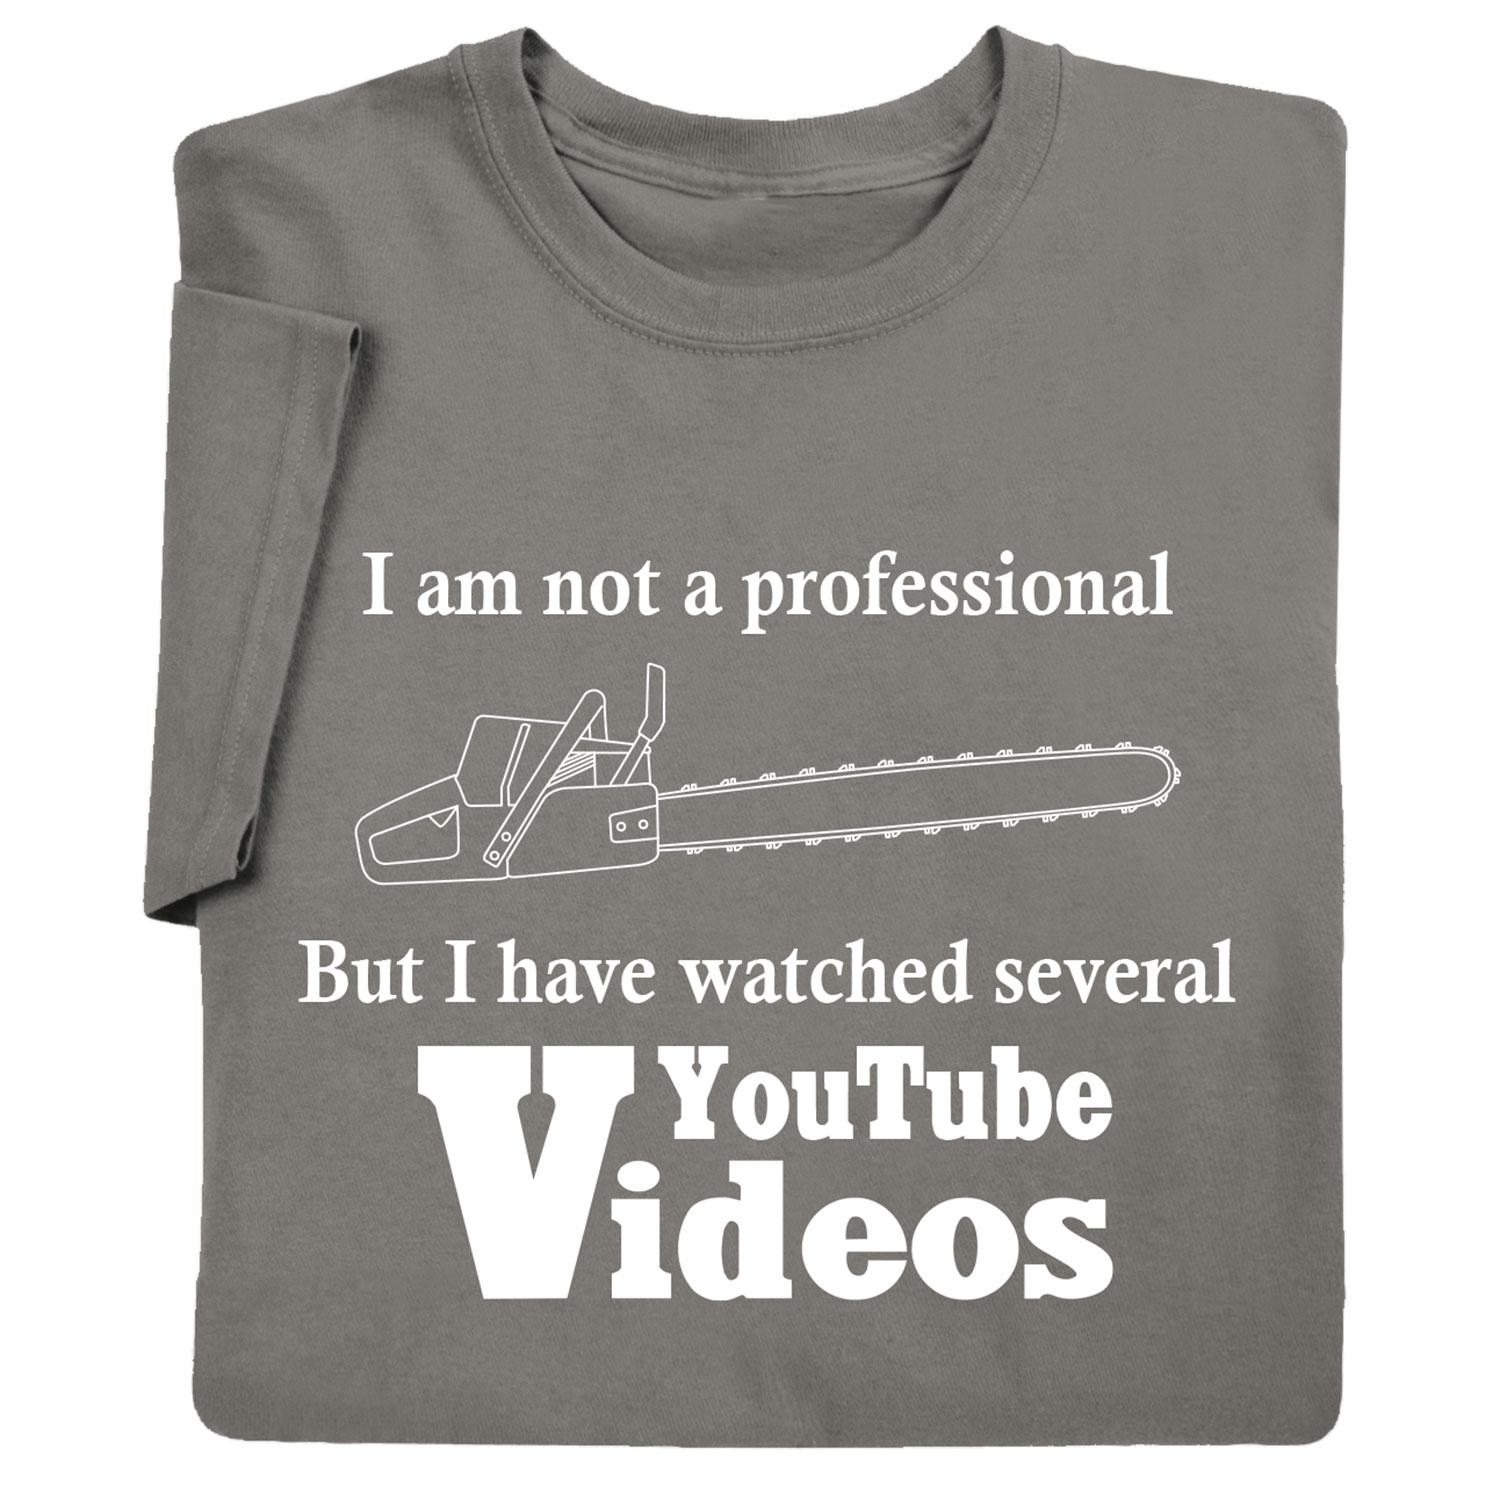 Product image for I Am Not a Professional T-Shirt or Sweatshirt